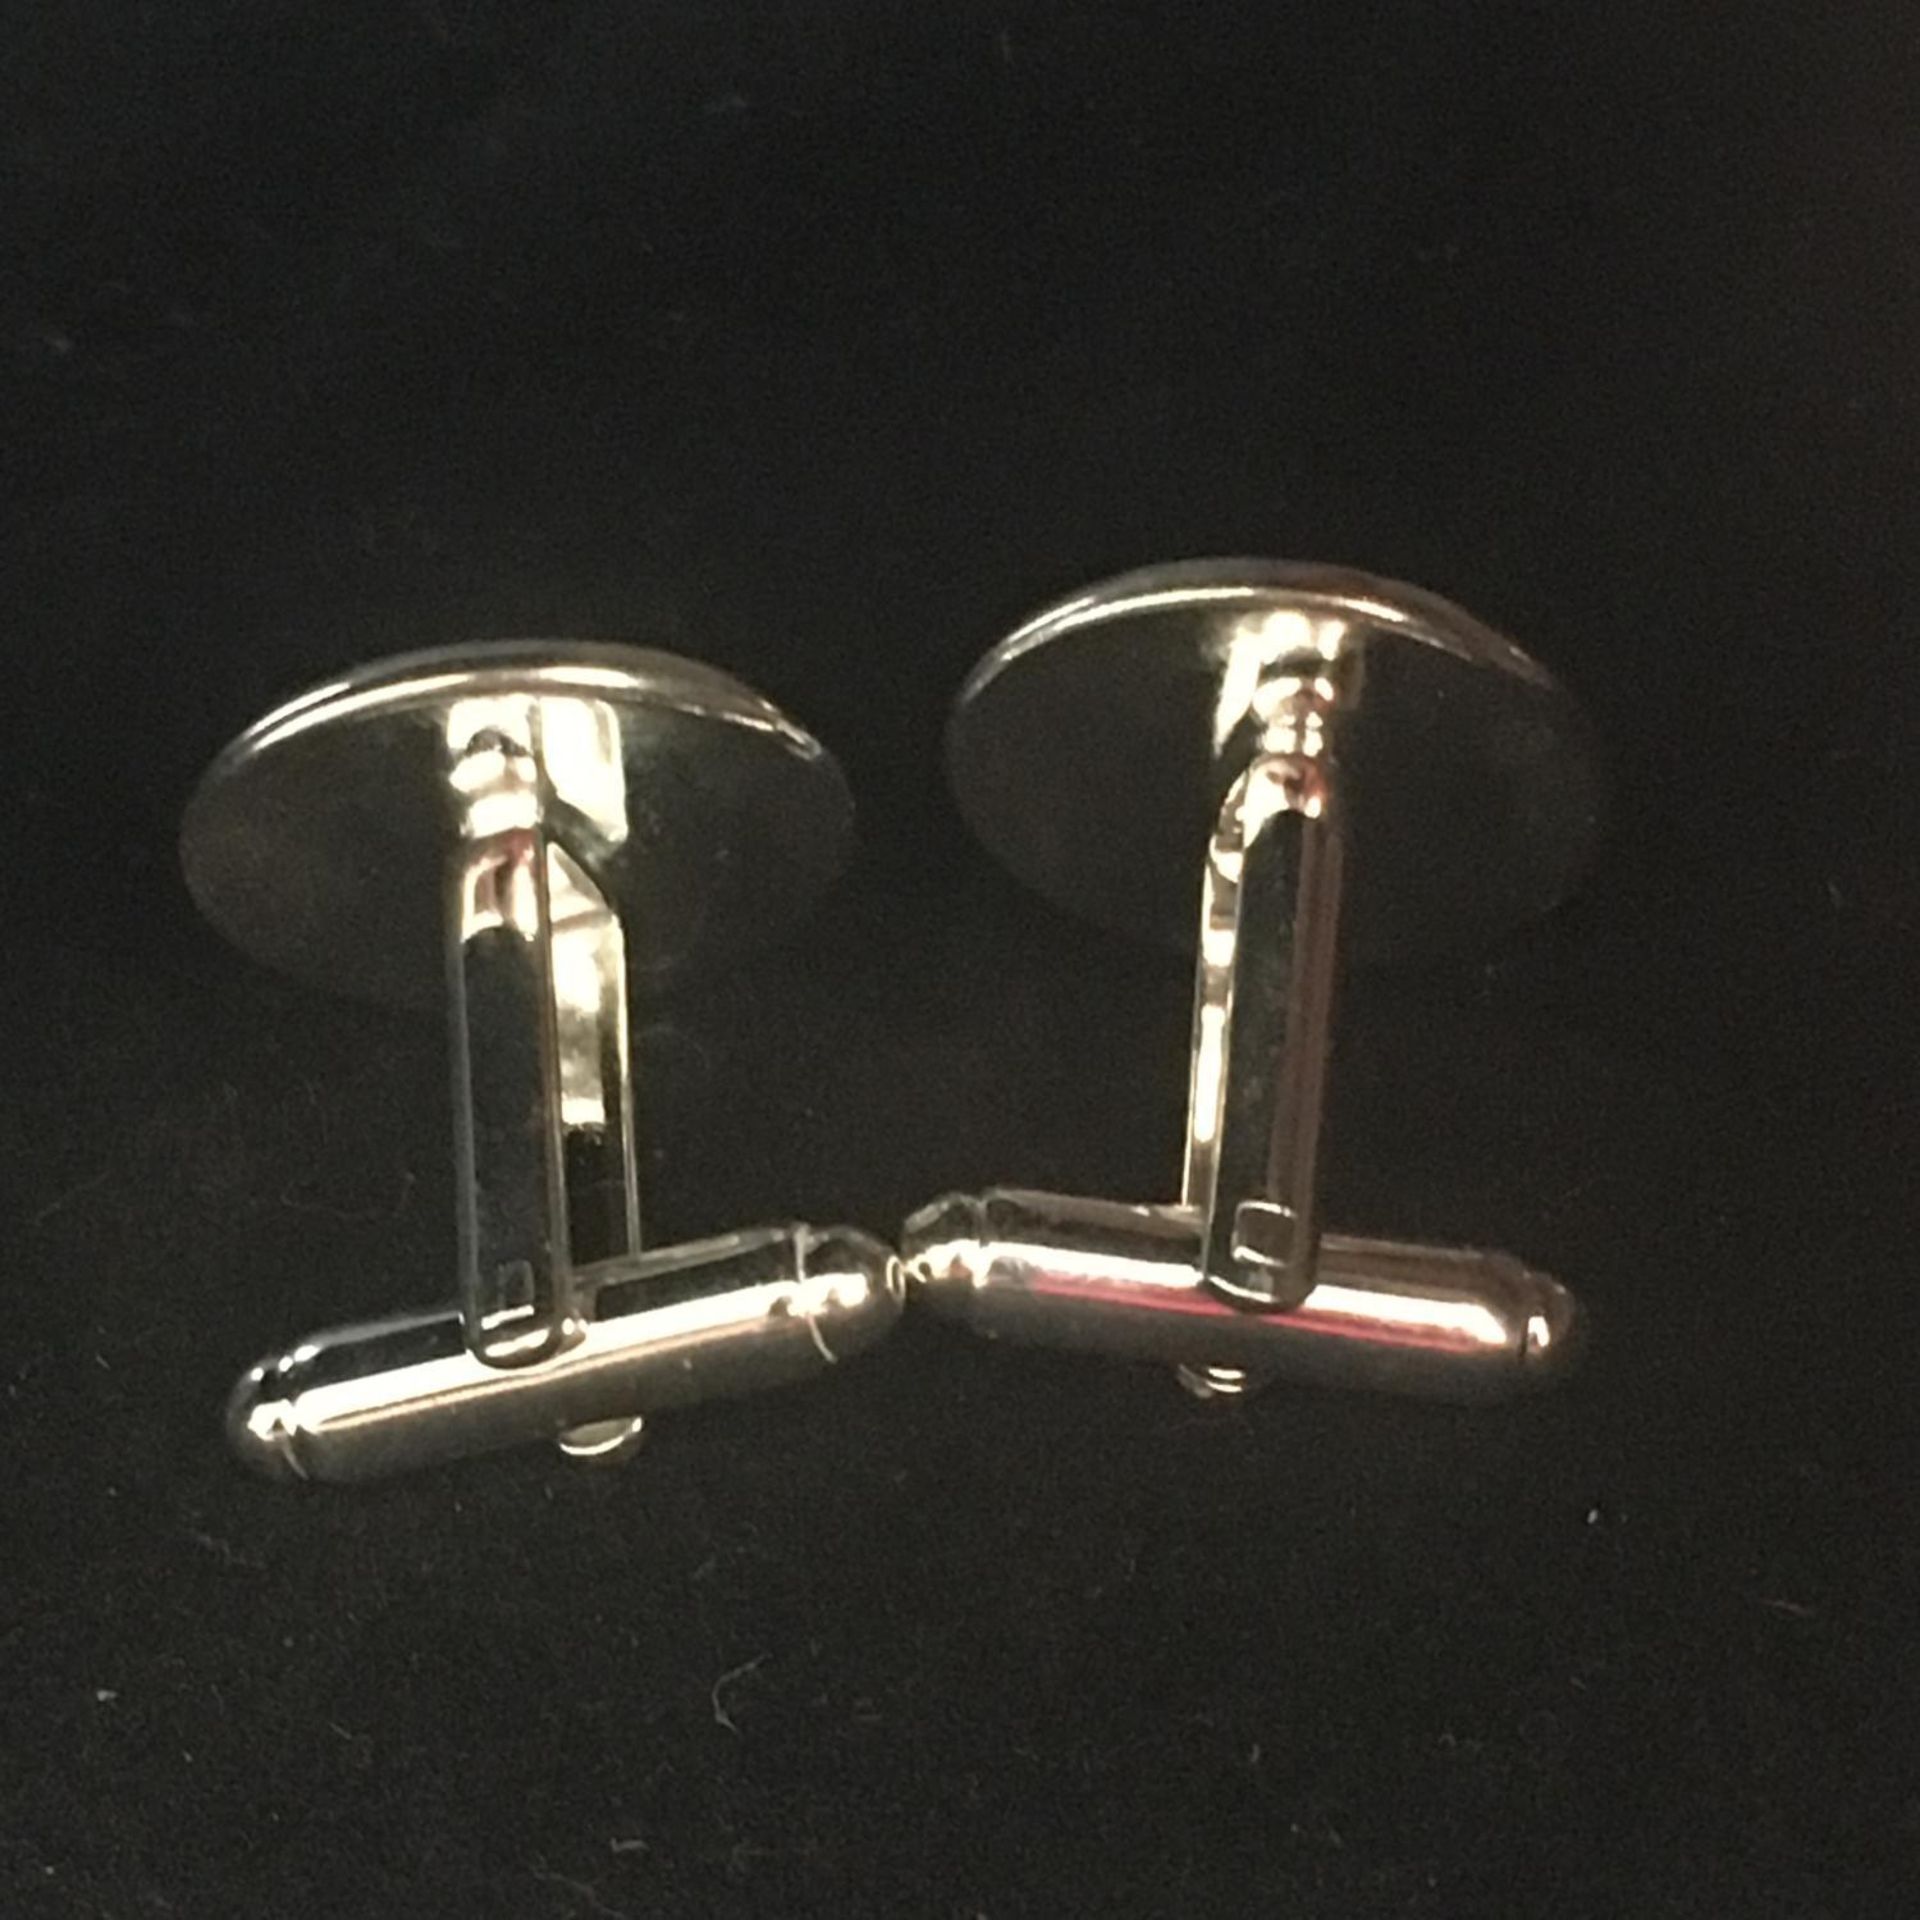 ANTIQUE PAIR OF STERLING SILVER THREEPENCES CUFFLINKS. Dated 1915 and set in silver plated - Image 3 of 3